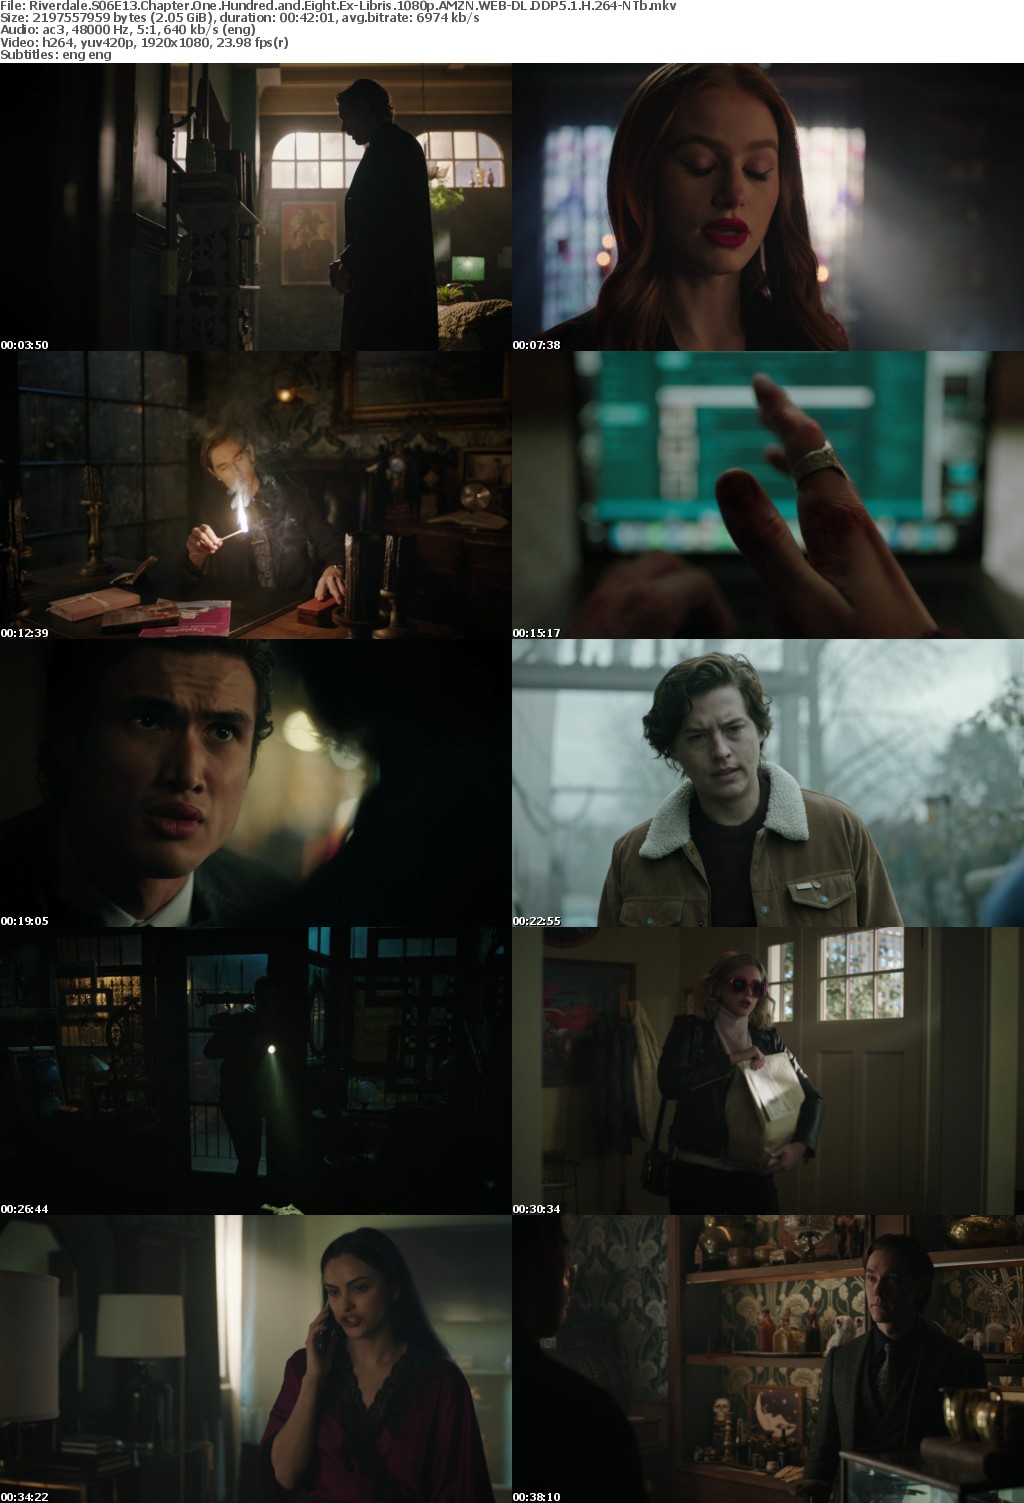 Riverdale US S06E13 Chapter One Hundred and Eight Ex-Libris 1080p AMZN WEBRip DDP5 1 x264-NTb